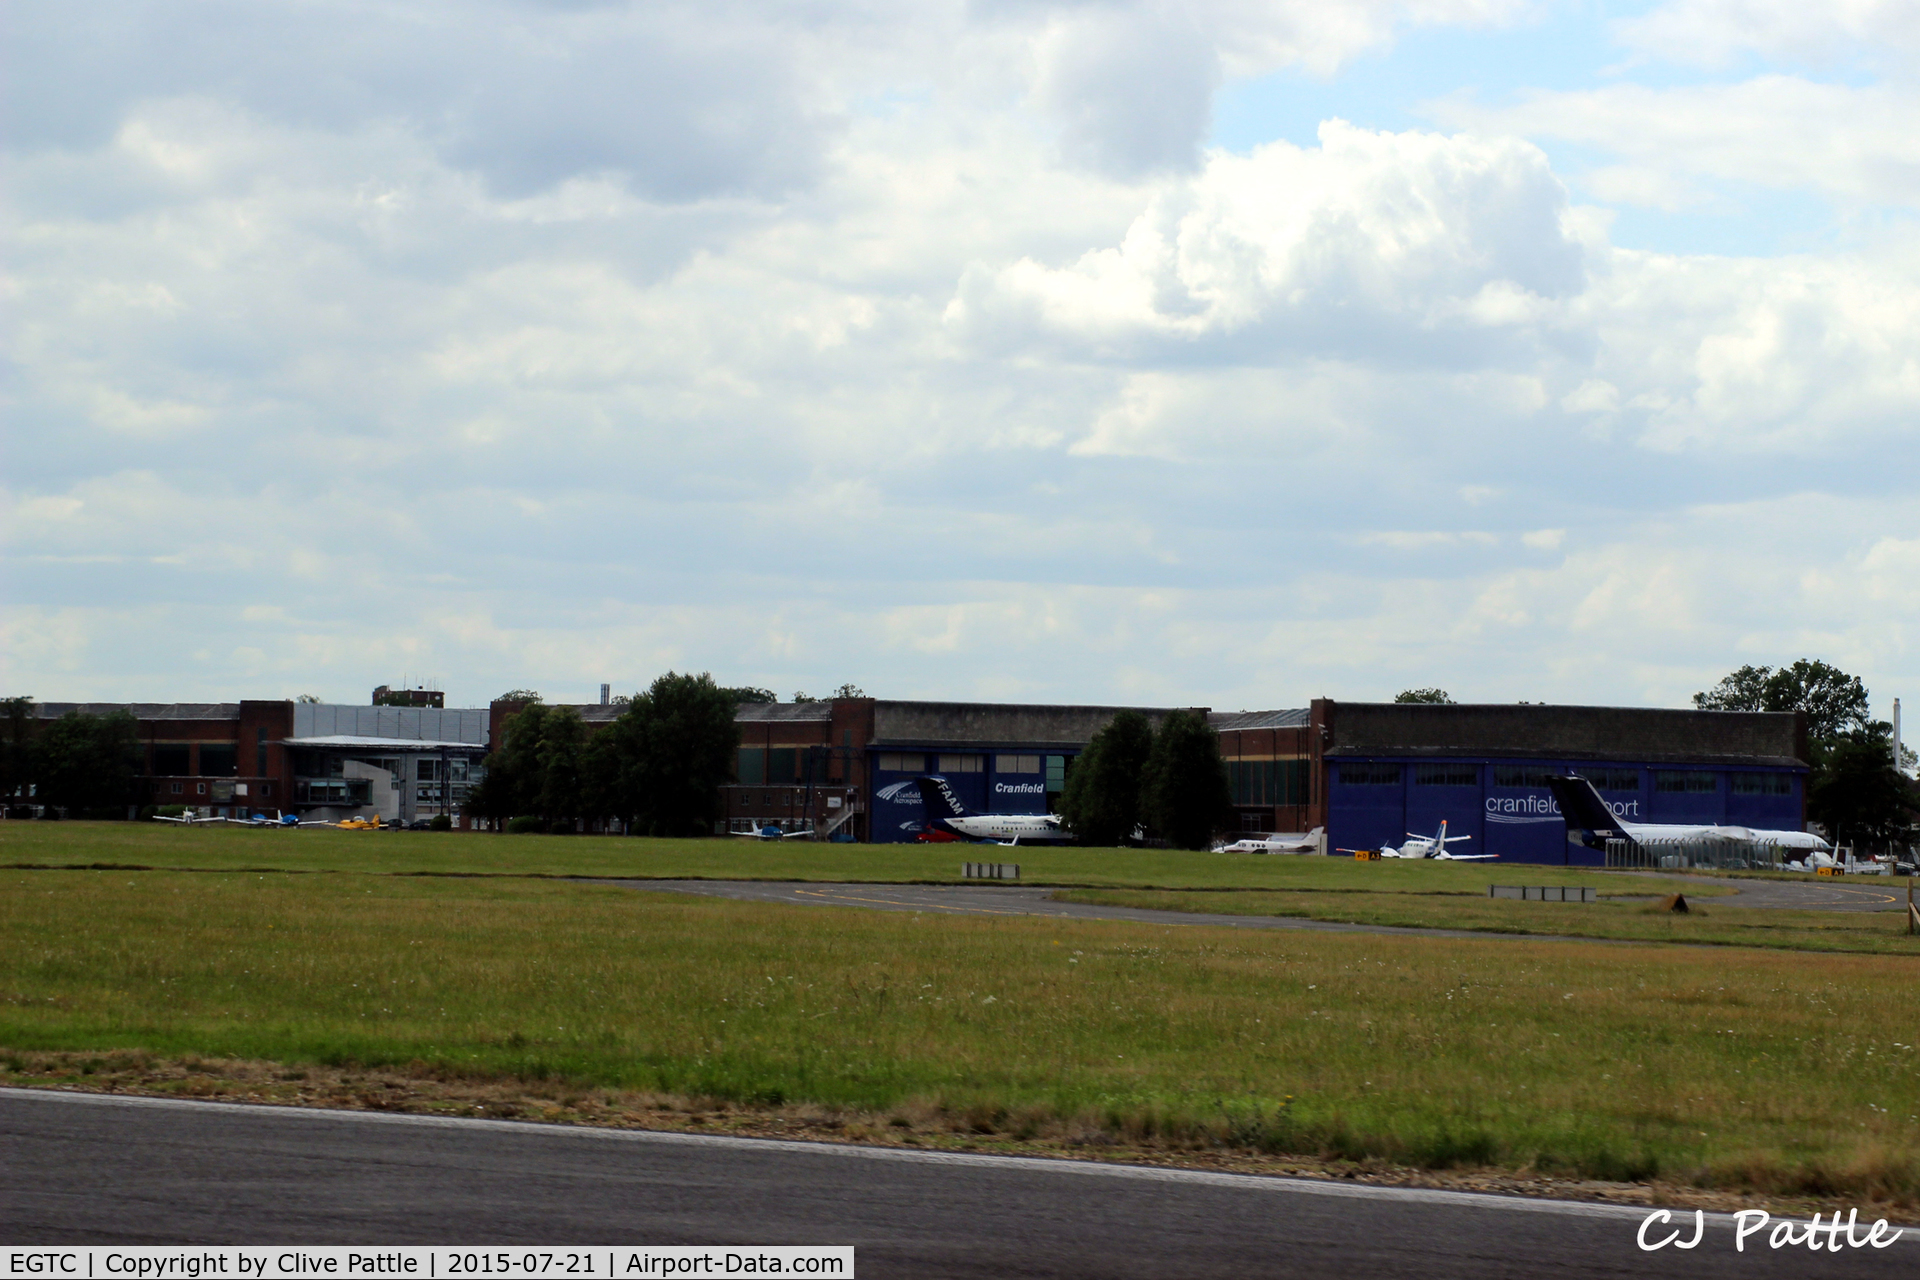 Cranfield Airport, Cranfield, England United Kingdom (EGTC) - Airport buildings at Cranfield EGTC, Bedfordshire, UK viewed from the runway